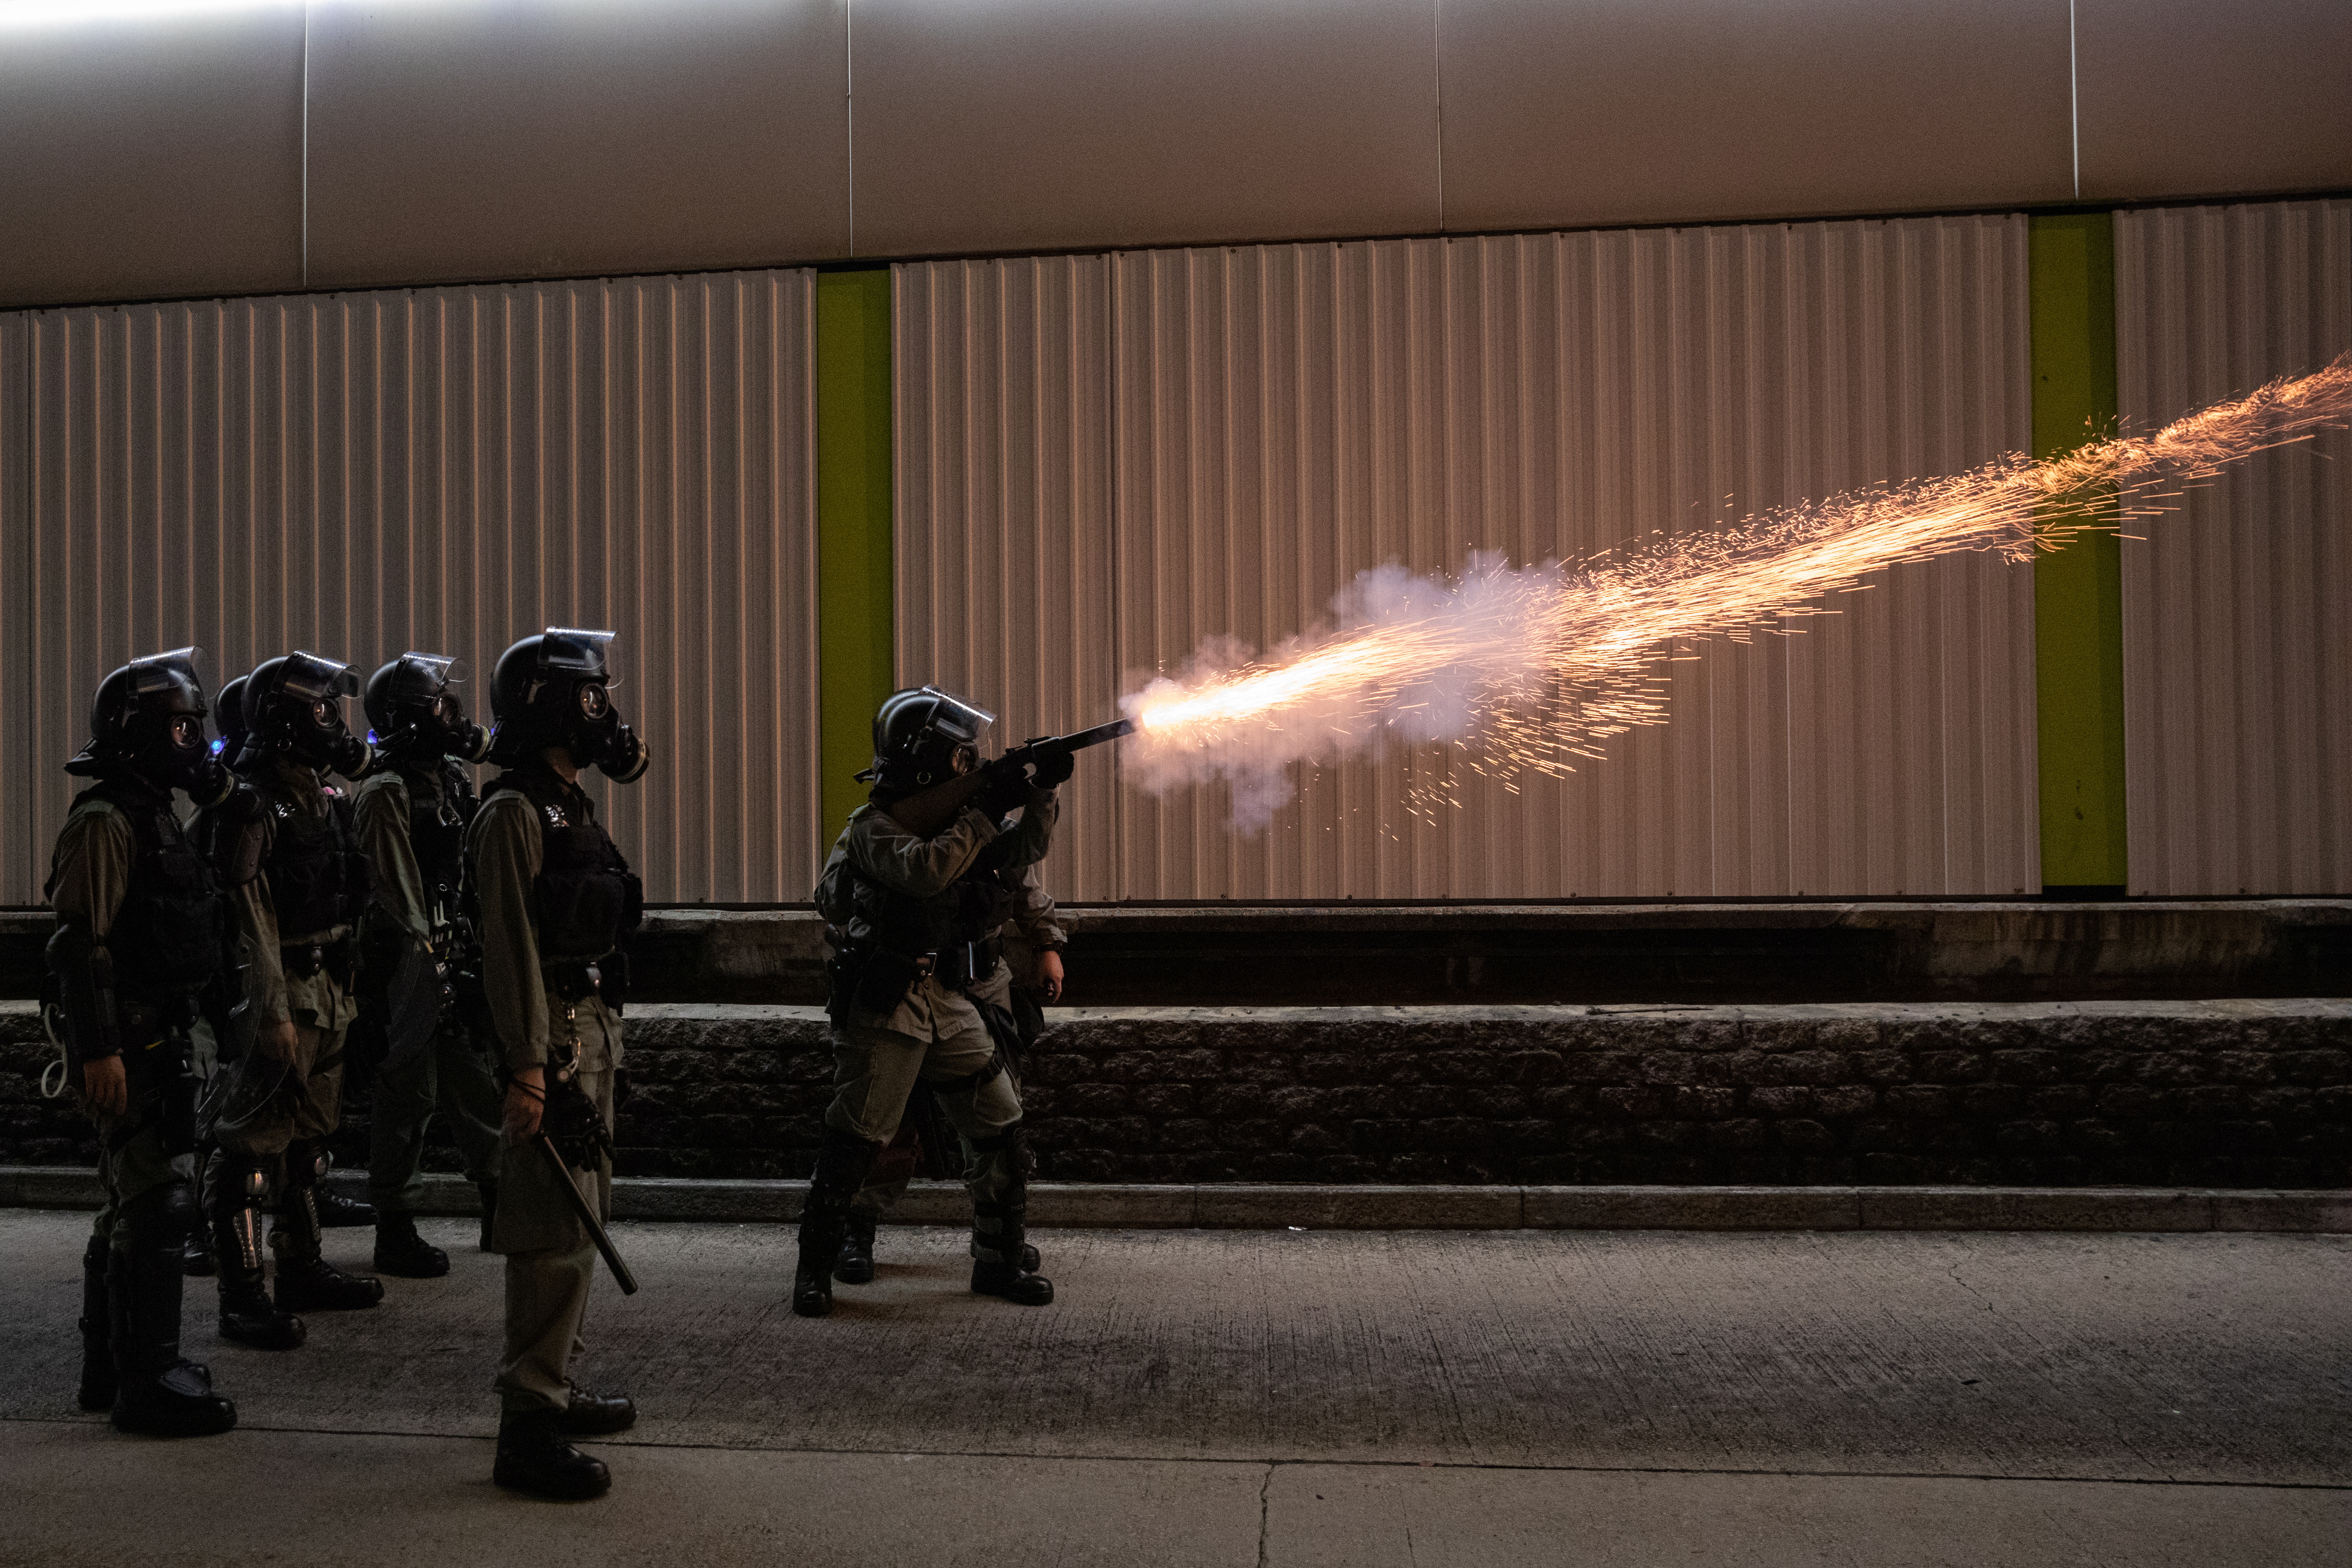 epa07938998 Police fire tear gas during a rally marking the third month anniversary of alleged triads members attacking protesters and residents in Yuen Long, New Territories, Hong Kong, China, 21 October 2019. Hong Kong has witnessed several months of ongoing mass protests, originally triggered by a now withdrawn extradition bill to mainland China that have turned into a wider pro-democracy movement.  EPA/JEROME FAVRE